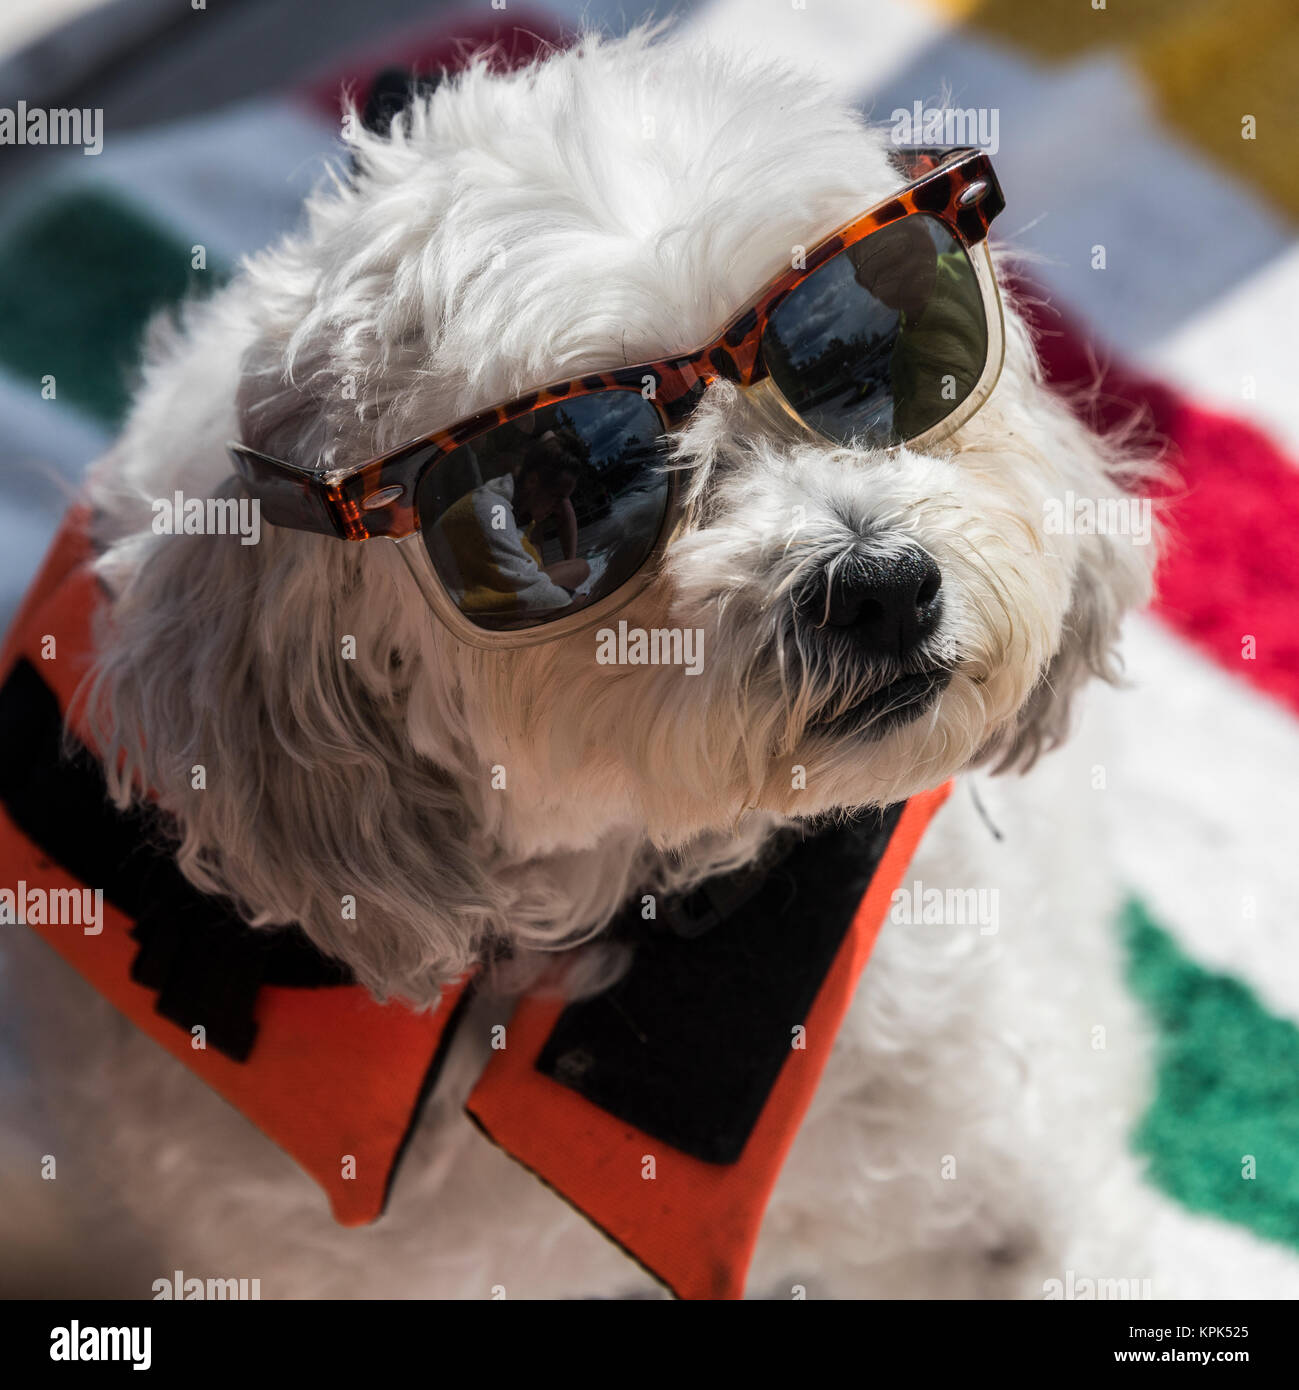 Portrait of a dog wearing sunglasses and a lifejacket and looking up at the camera; Lake of the Woods, Ontario, Canada Stock Photo